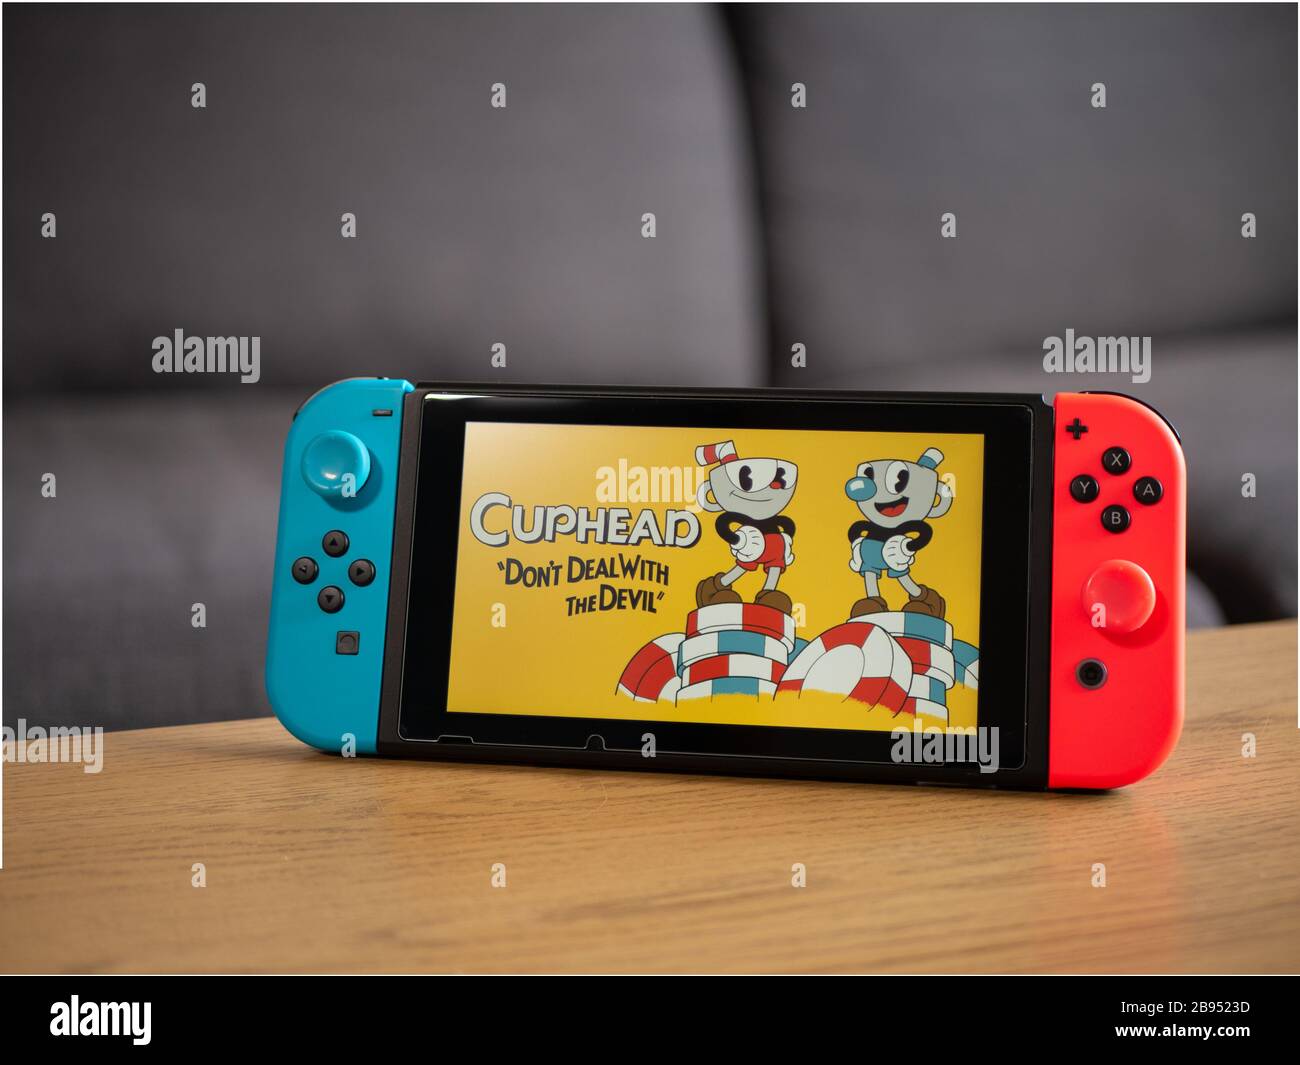 Nintendo Switch And Small Nintendo Switch Lite Comparison Of Two Handheld  Game Consoles Stock Photo - Download Image Now - iStock